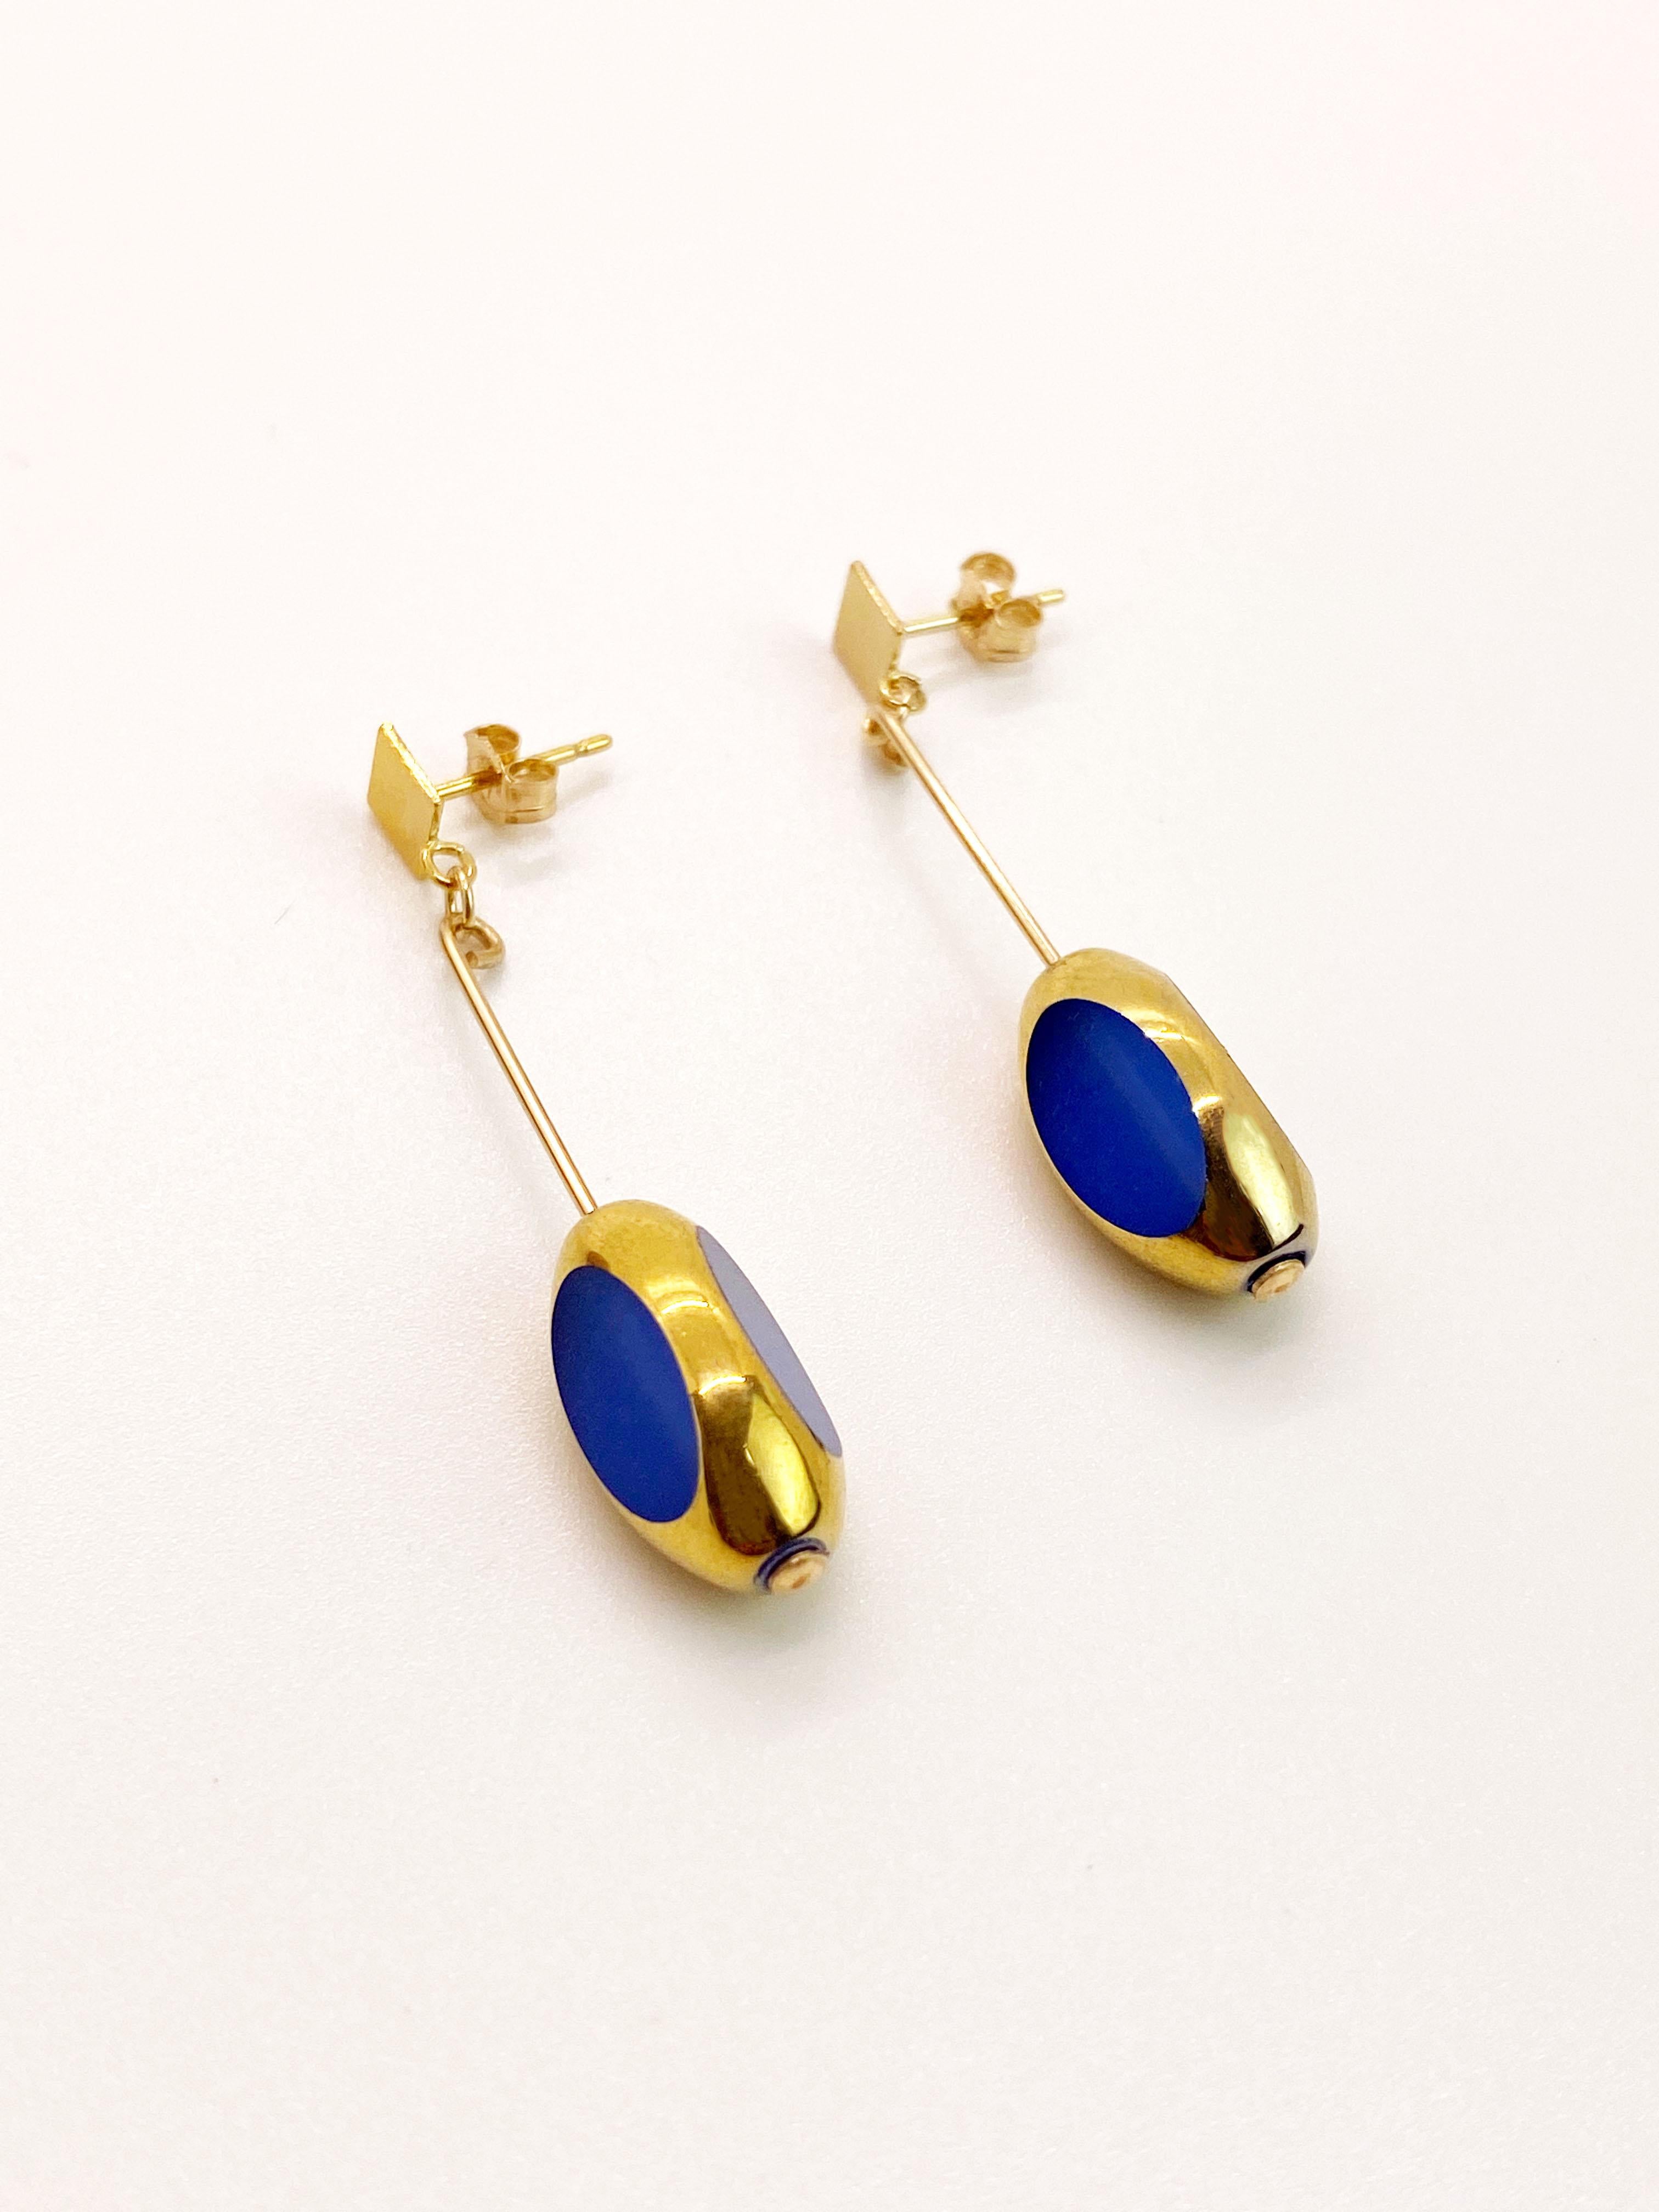 Matte Blue vintage German glass beads edged with 24K gold dangles on a 14K gold filled ear wire. 

The German vintage glass beads are considered rare and collectible, circa 1920s-1960s.